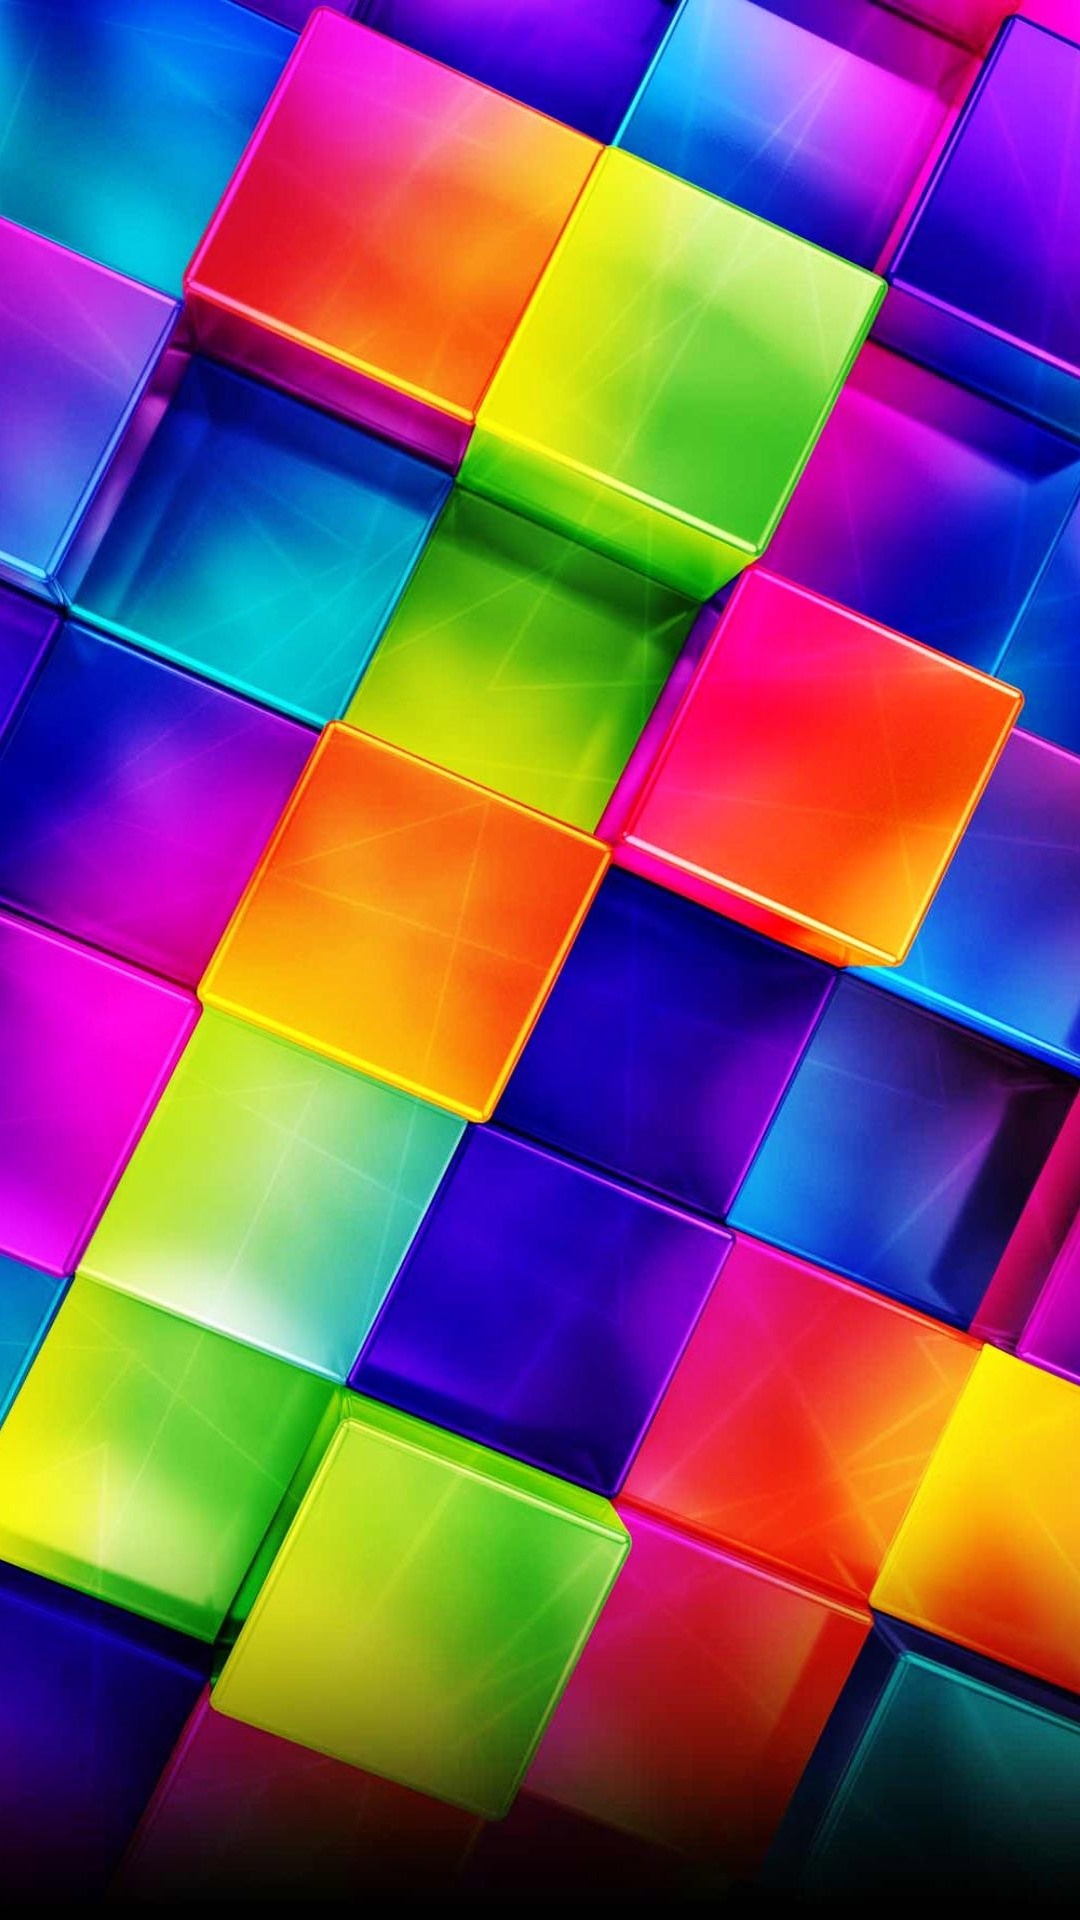 3d Geometric Colorful Android Wallpaper - Colorful Wallpapers Android - HD Wallpaper 